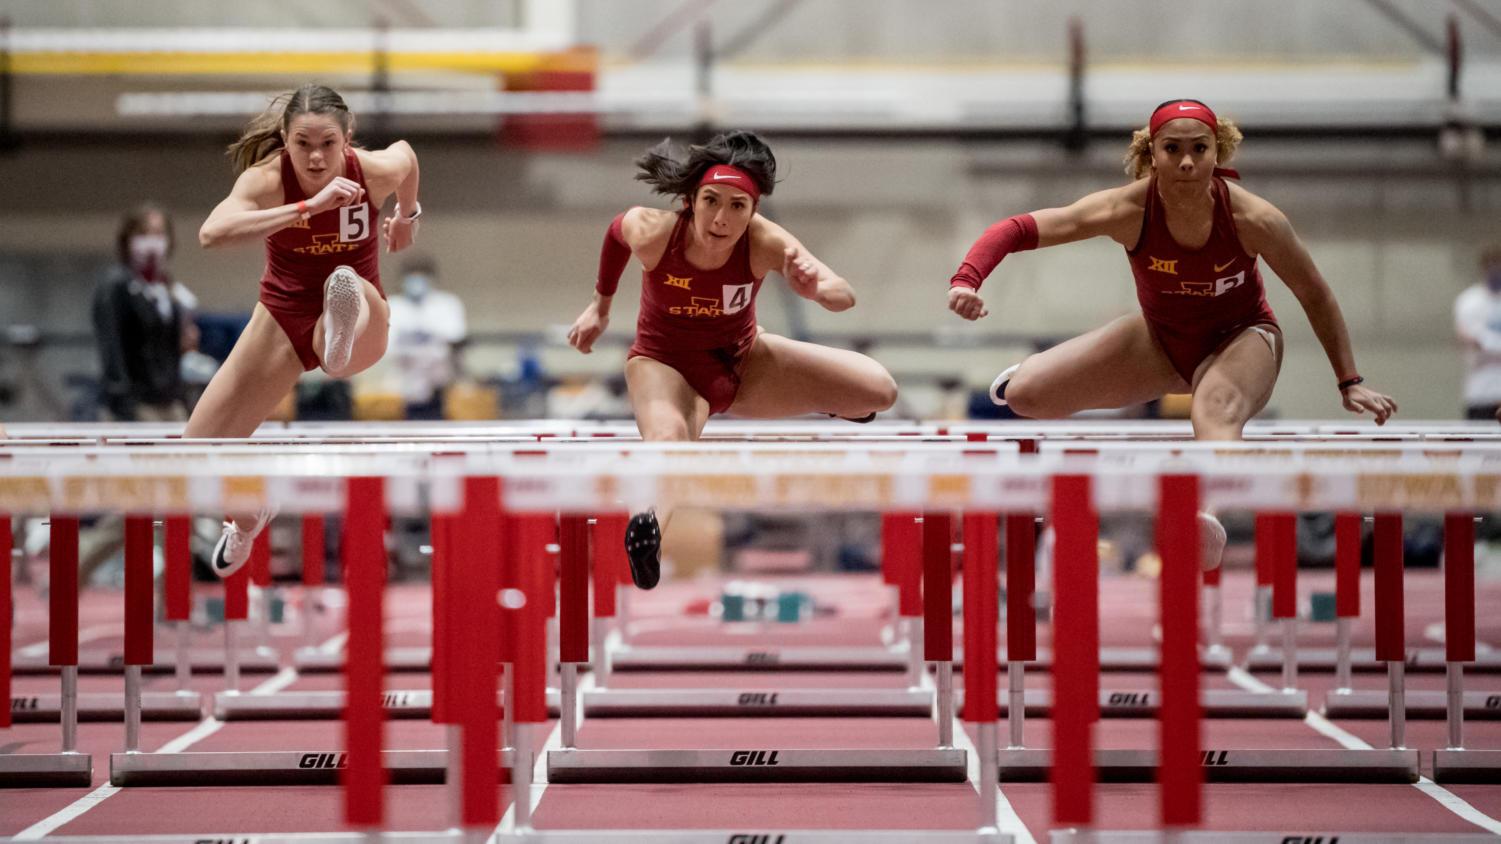 TITLE IX AT ISU: Uhl was nation's best on the track